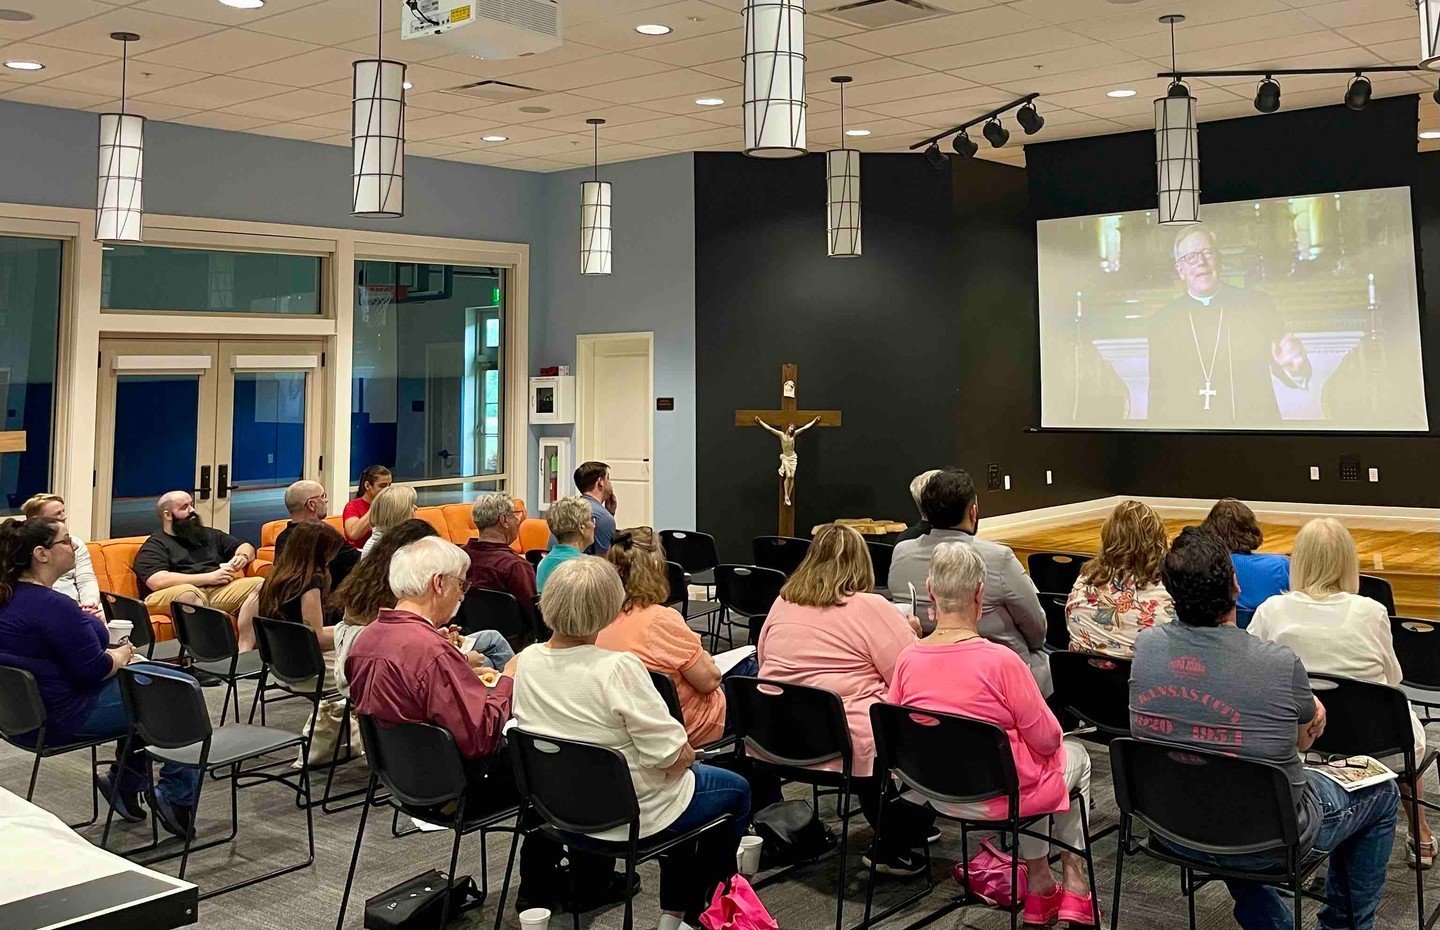 The first night of &ldquo;The Creed&rdquo; by Bishop Robert Barron had a great start with a wonderful discussion about 4 words: &ldquo;I believe in God.&rdquo;

Just us next week, May 7th, at 6:30 pm for the next discussion.